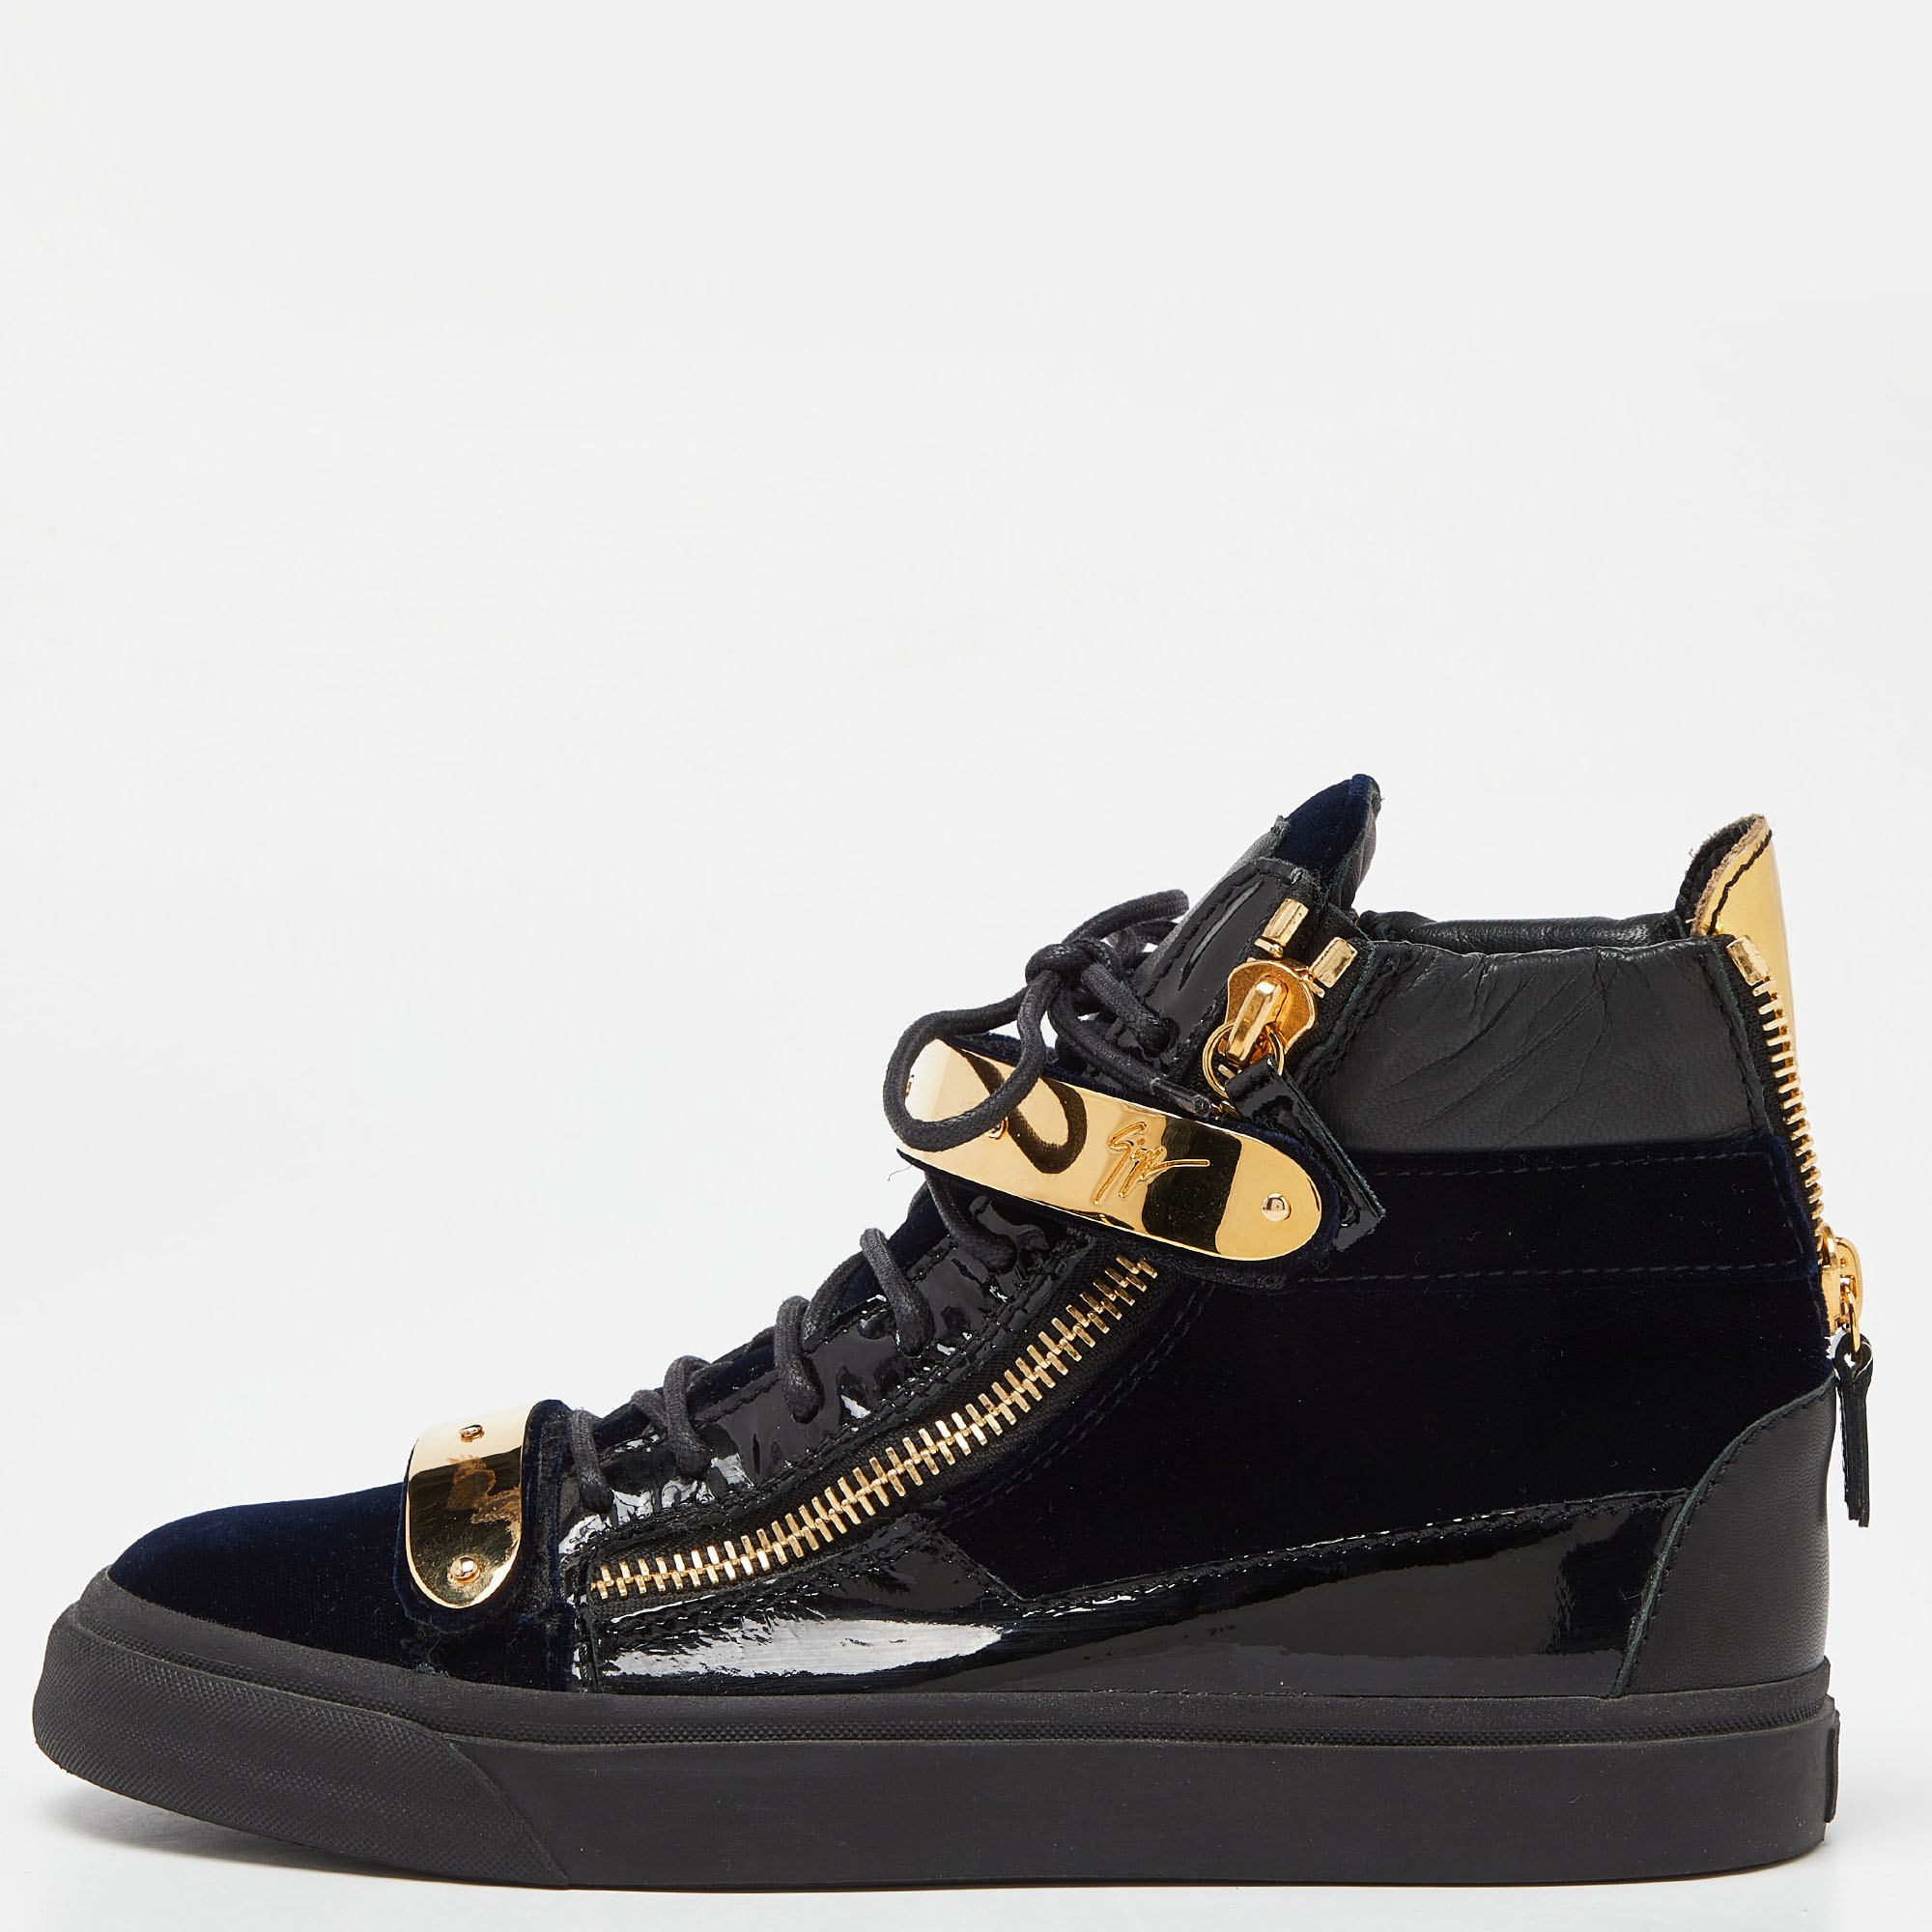 Pre-owned Giuseppe Zanotti Navy Blue/black Velvet And Leather Coby High Top Sneakers Size 39.5